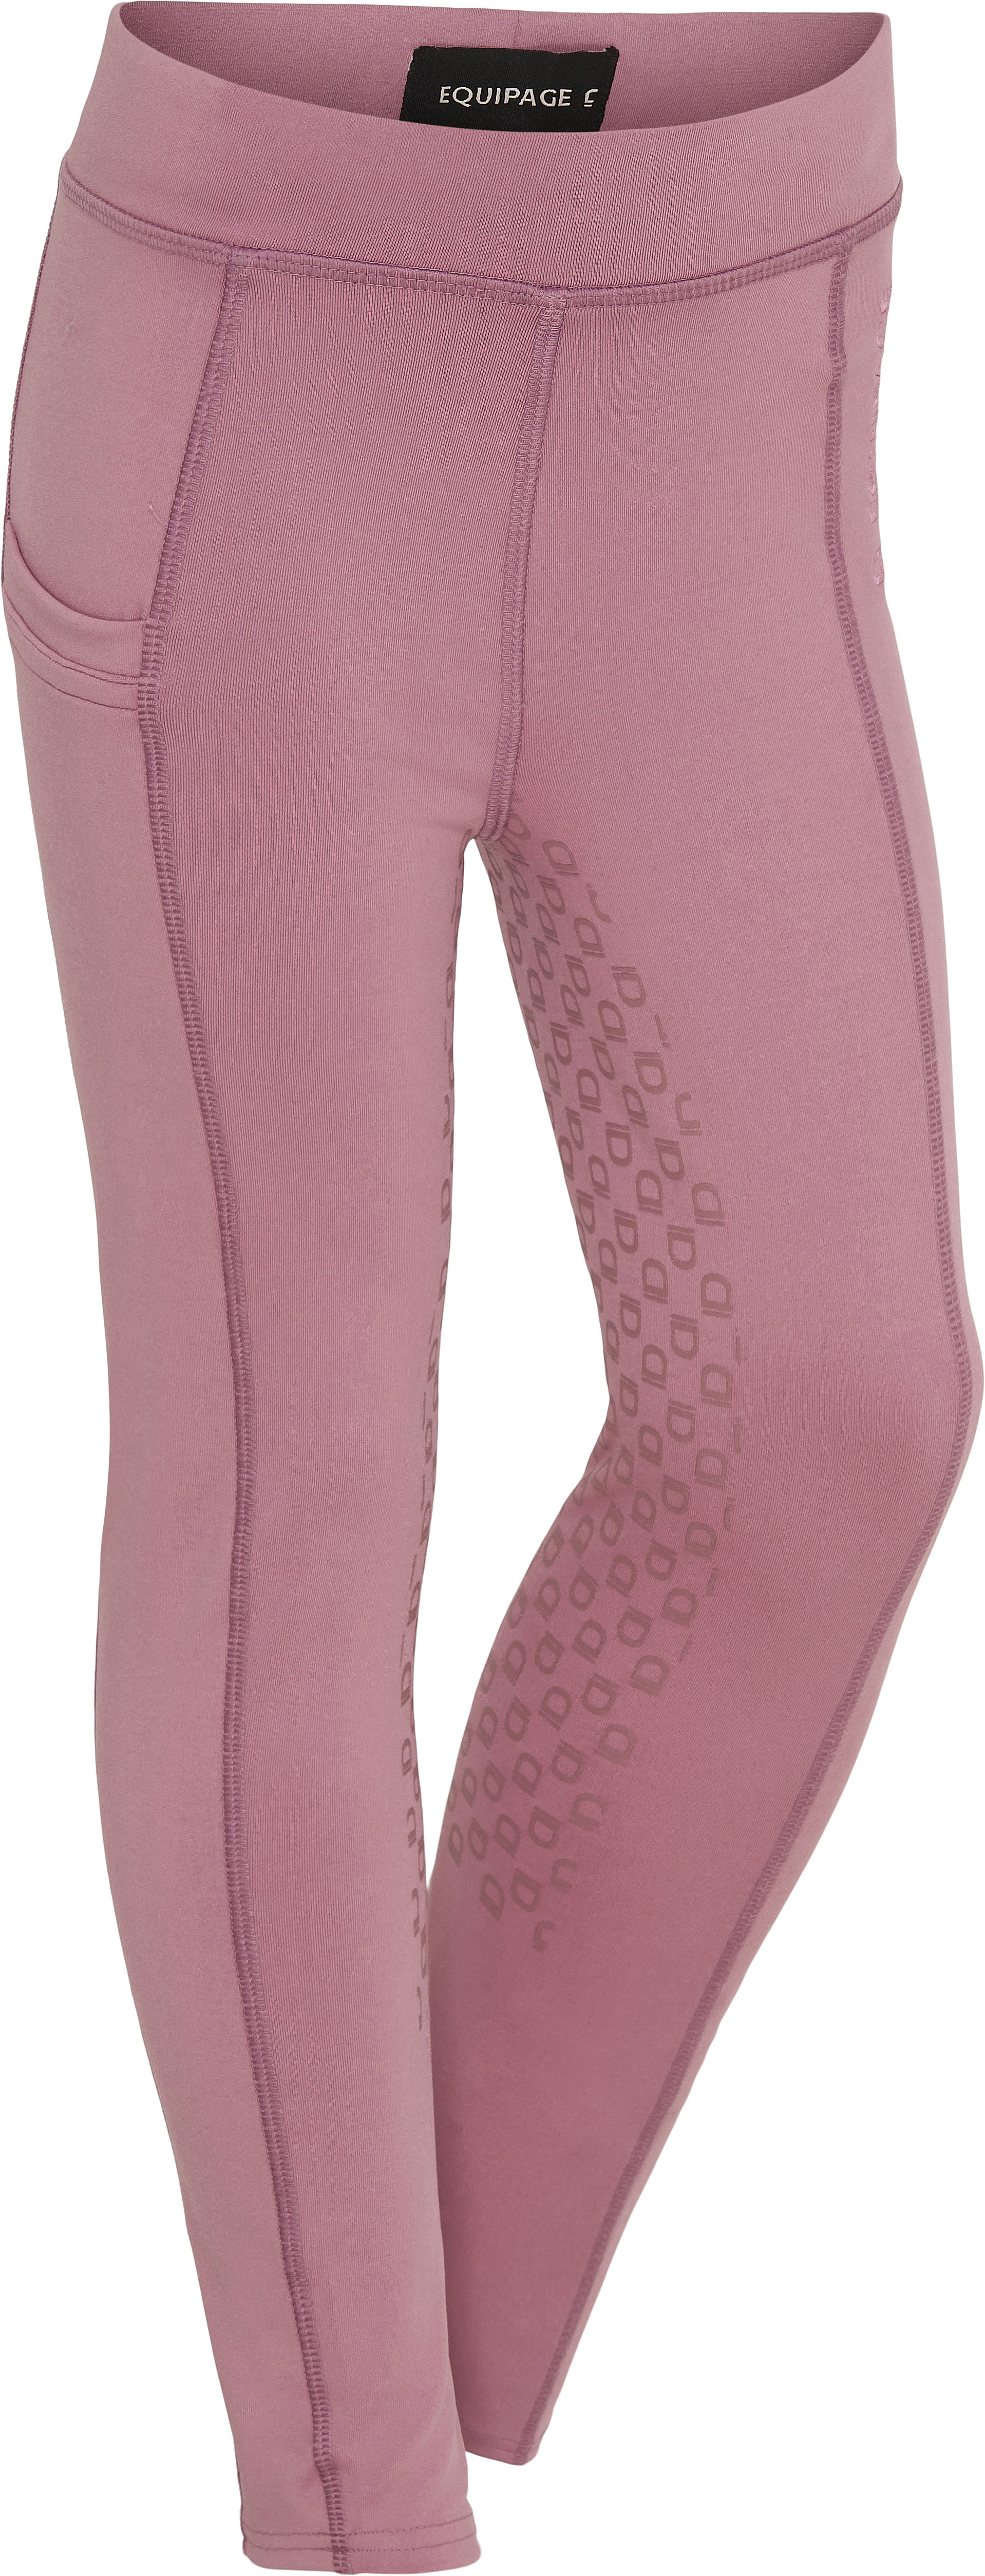 Equipage Molly Full Grip Tights - Misty Rose (116)